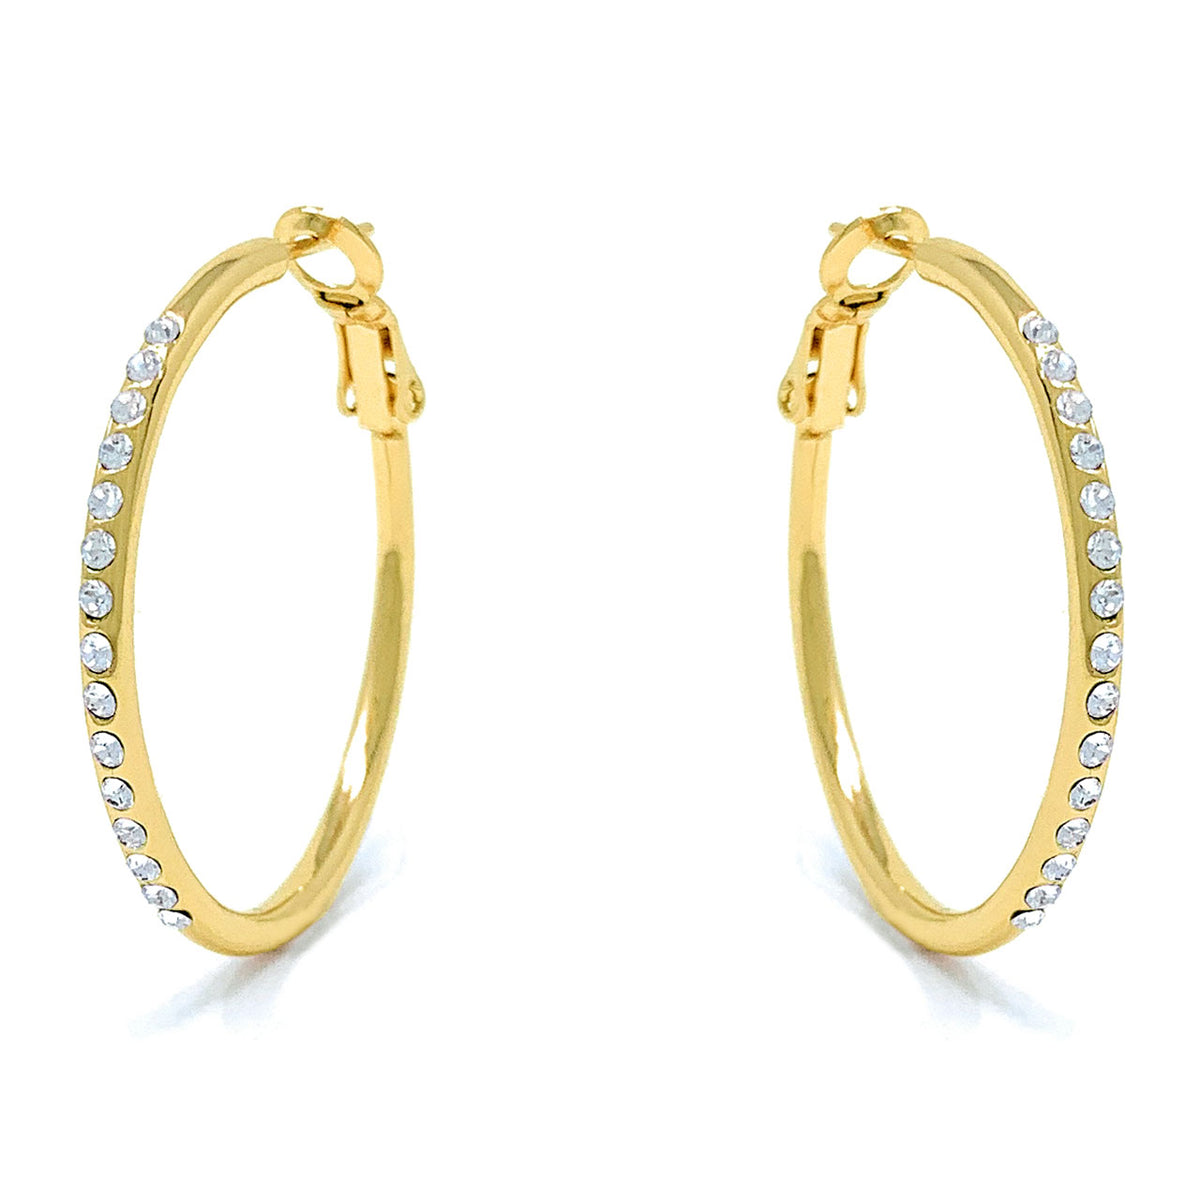 Amelia Small Pave Hoop Earrings with White Clear Round Crystals from Swarovski Gold Plated - Ed Heart